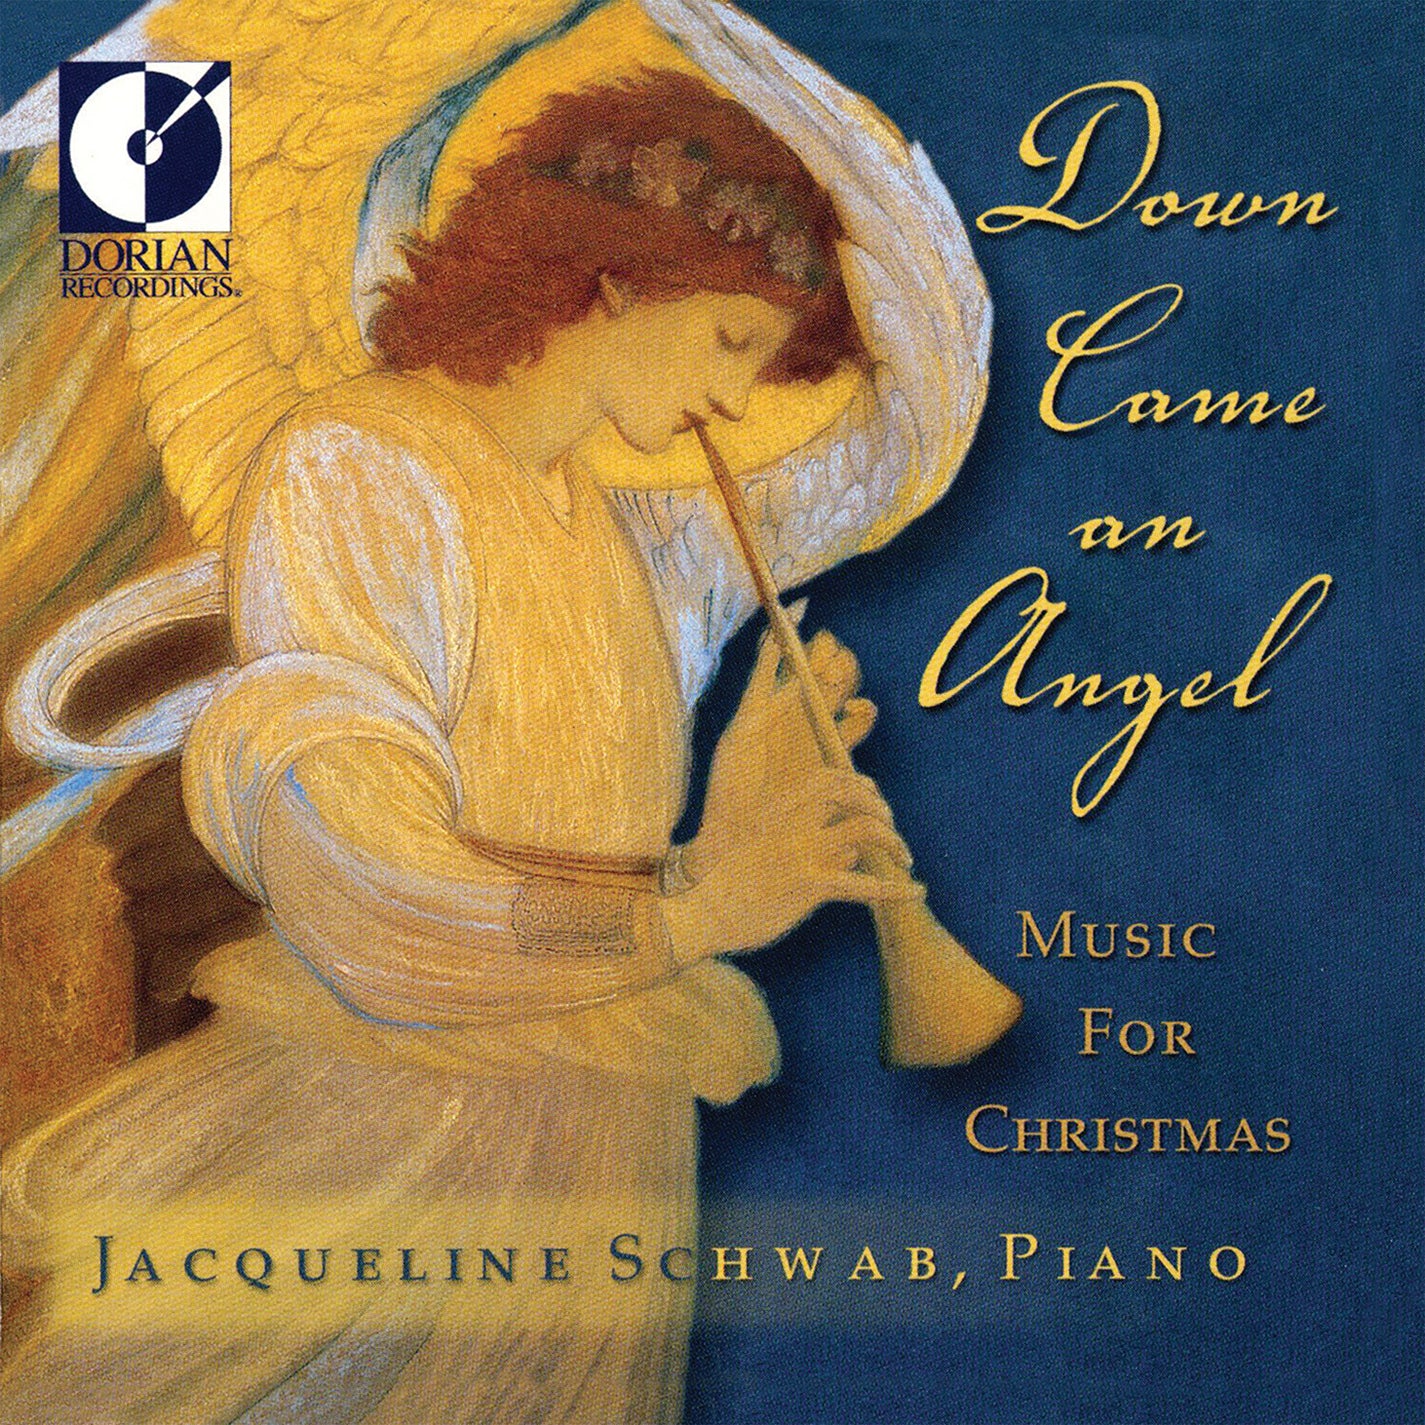 Down Came An Angel - Music for Christmas / Jacqueline Schwab